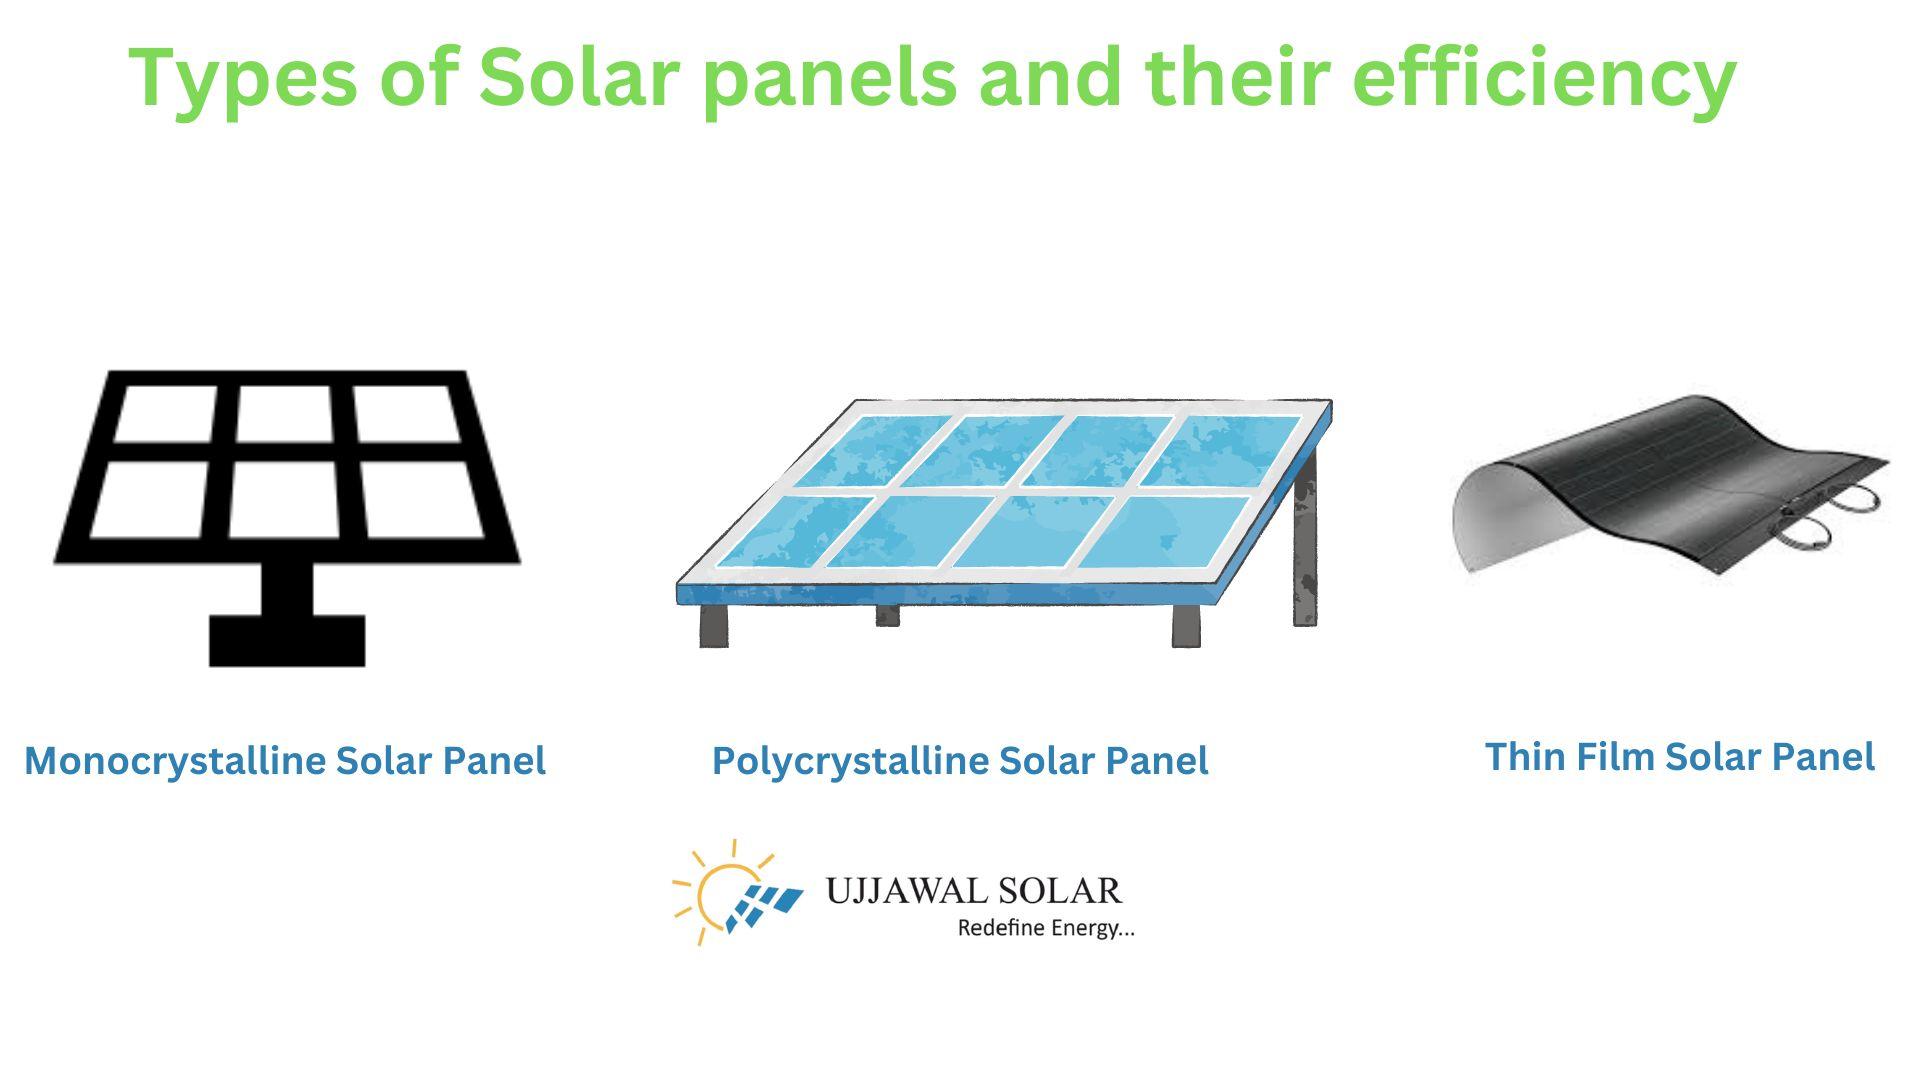 Types of Solar panels and their efficiency